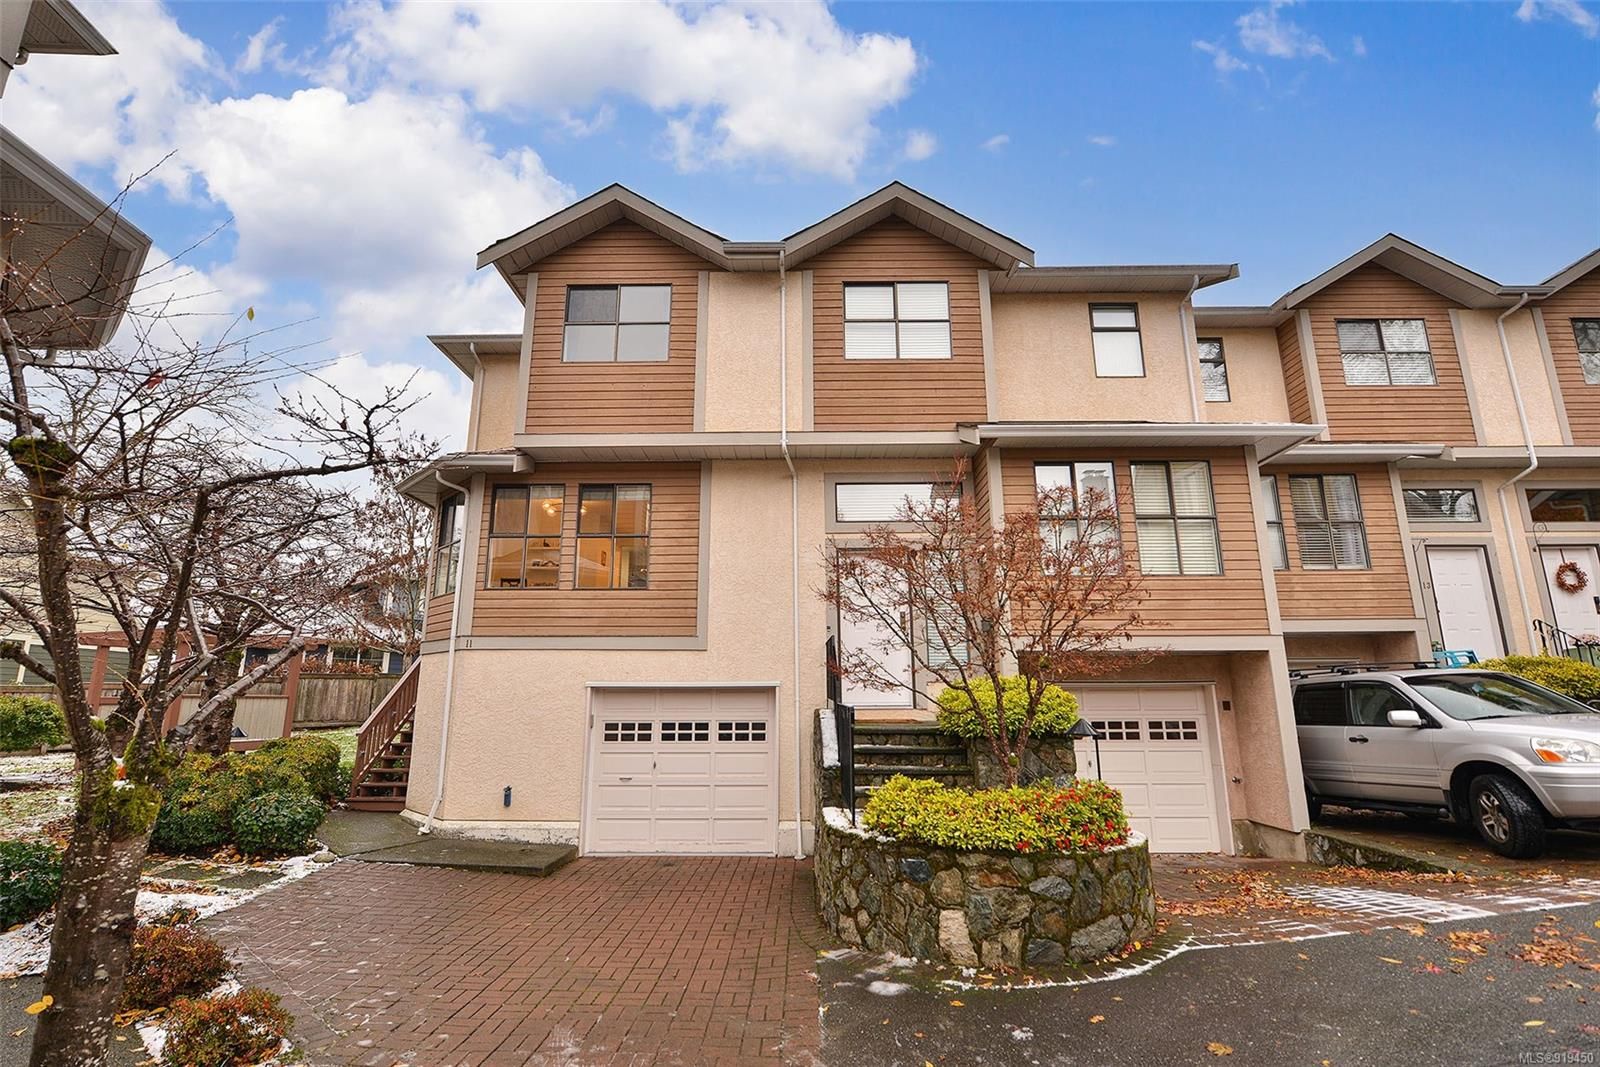 Welcome to #11 - 4580 West Saanich Rd!